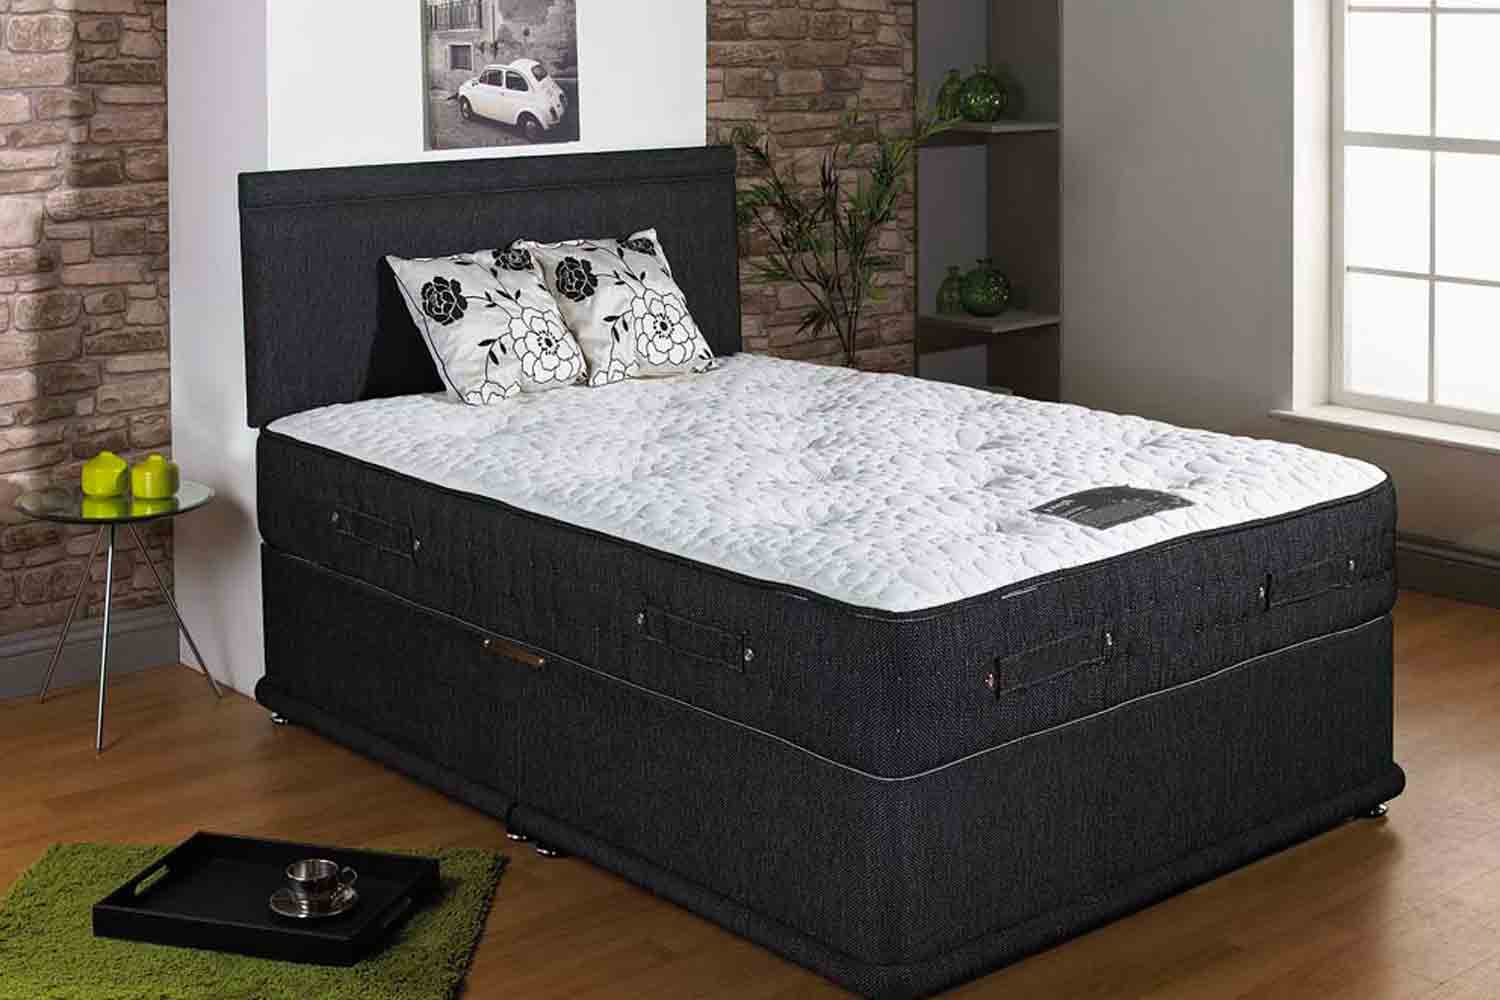 Joseph Bubbles 1500 Pocket Sprung Divan Bed-Super King Size-2 Drawers Either Side